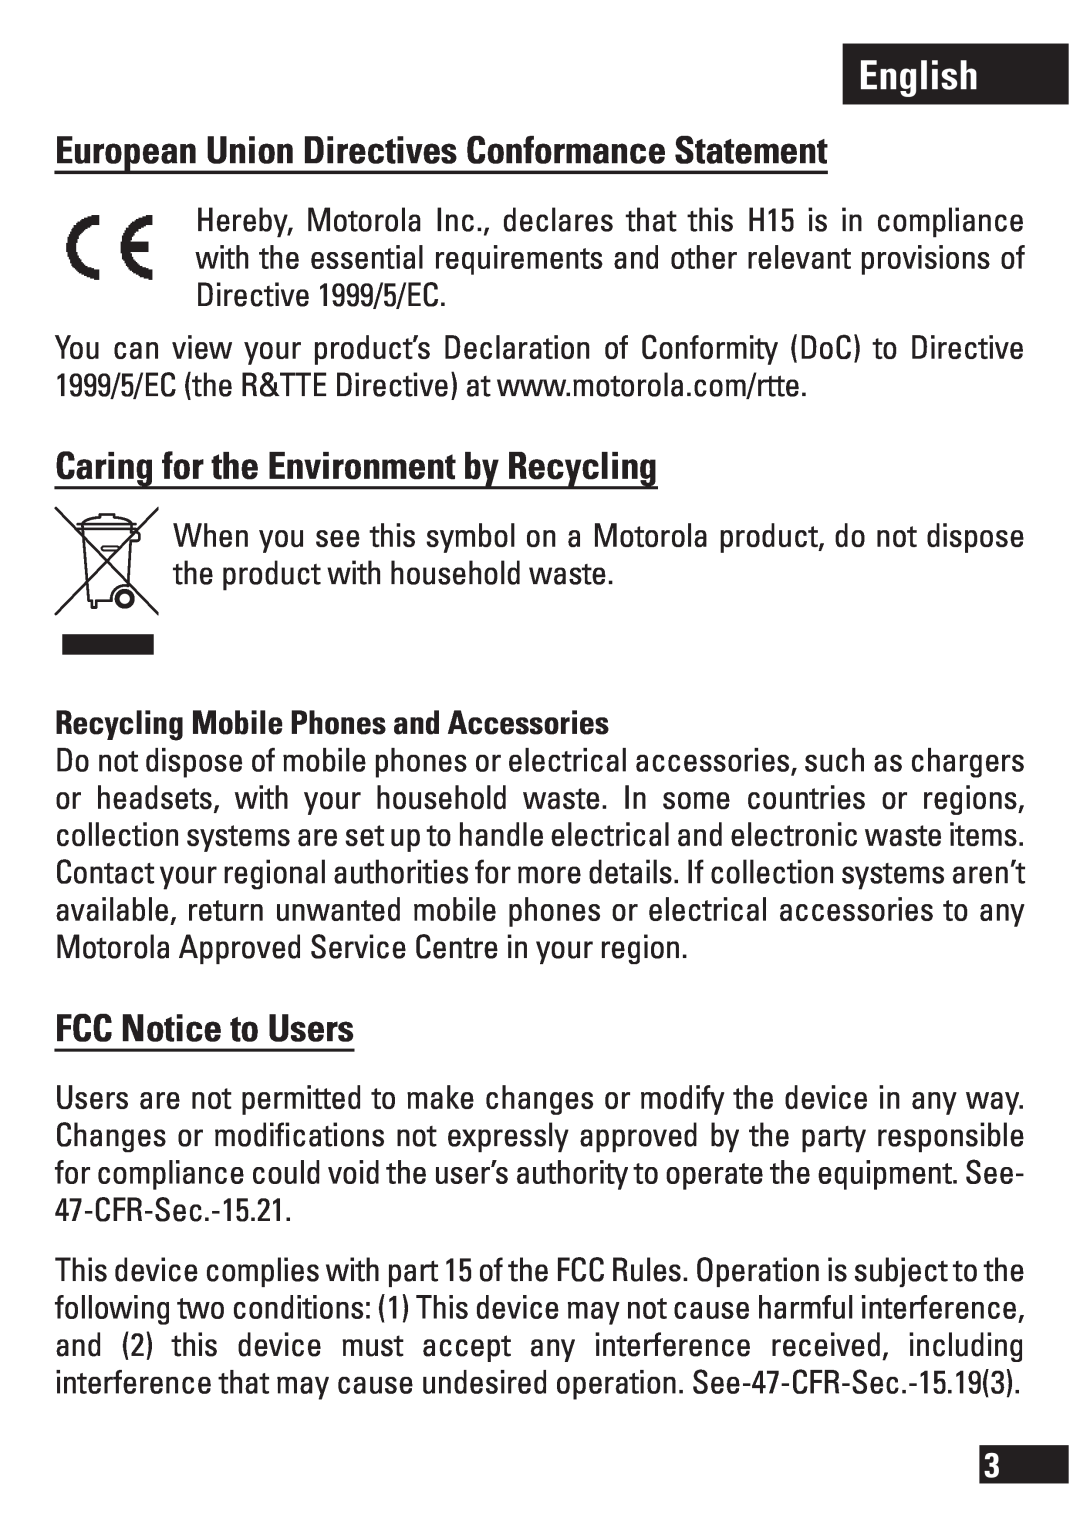 Motorola 6803578F33 English, European Union Directives Conformance Statement, Caring for the Environment by Recycling 